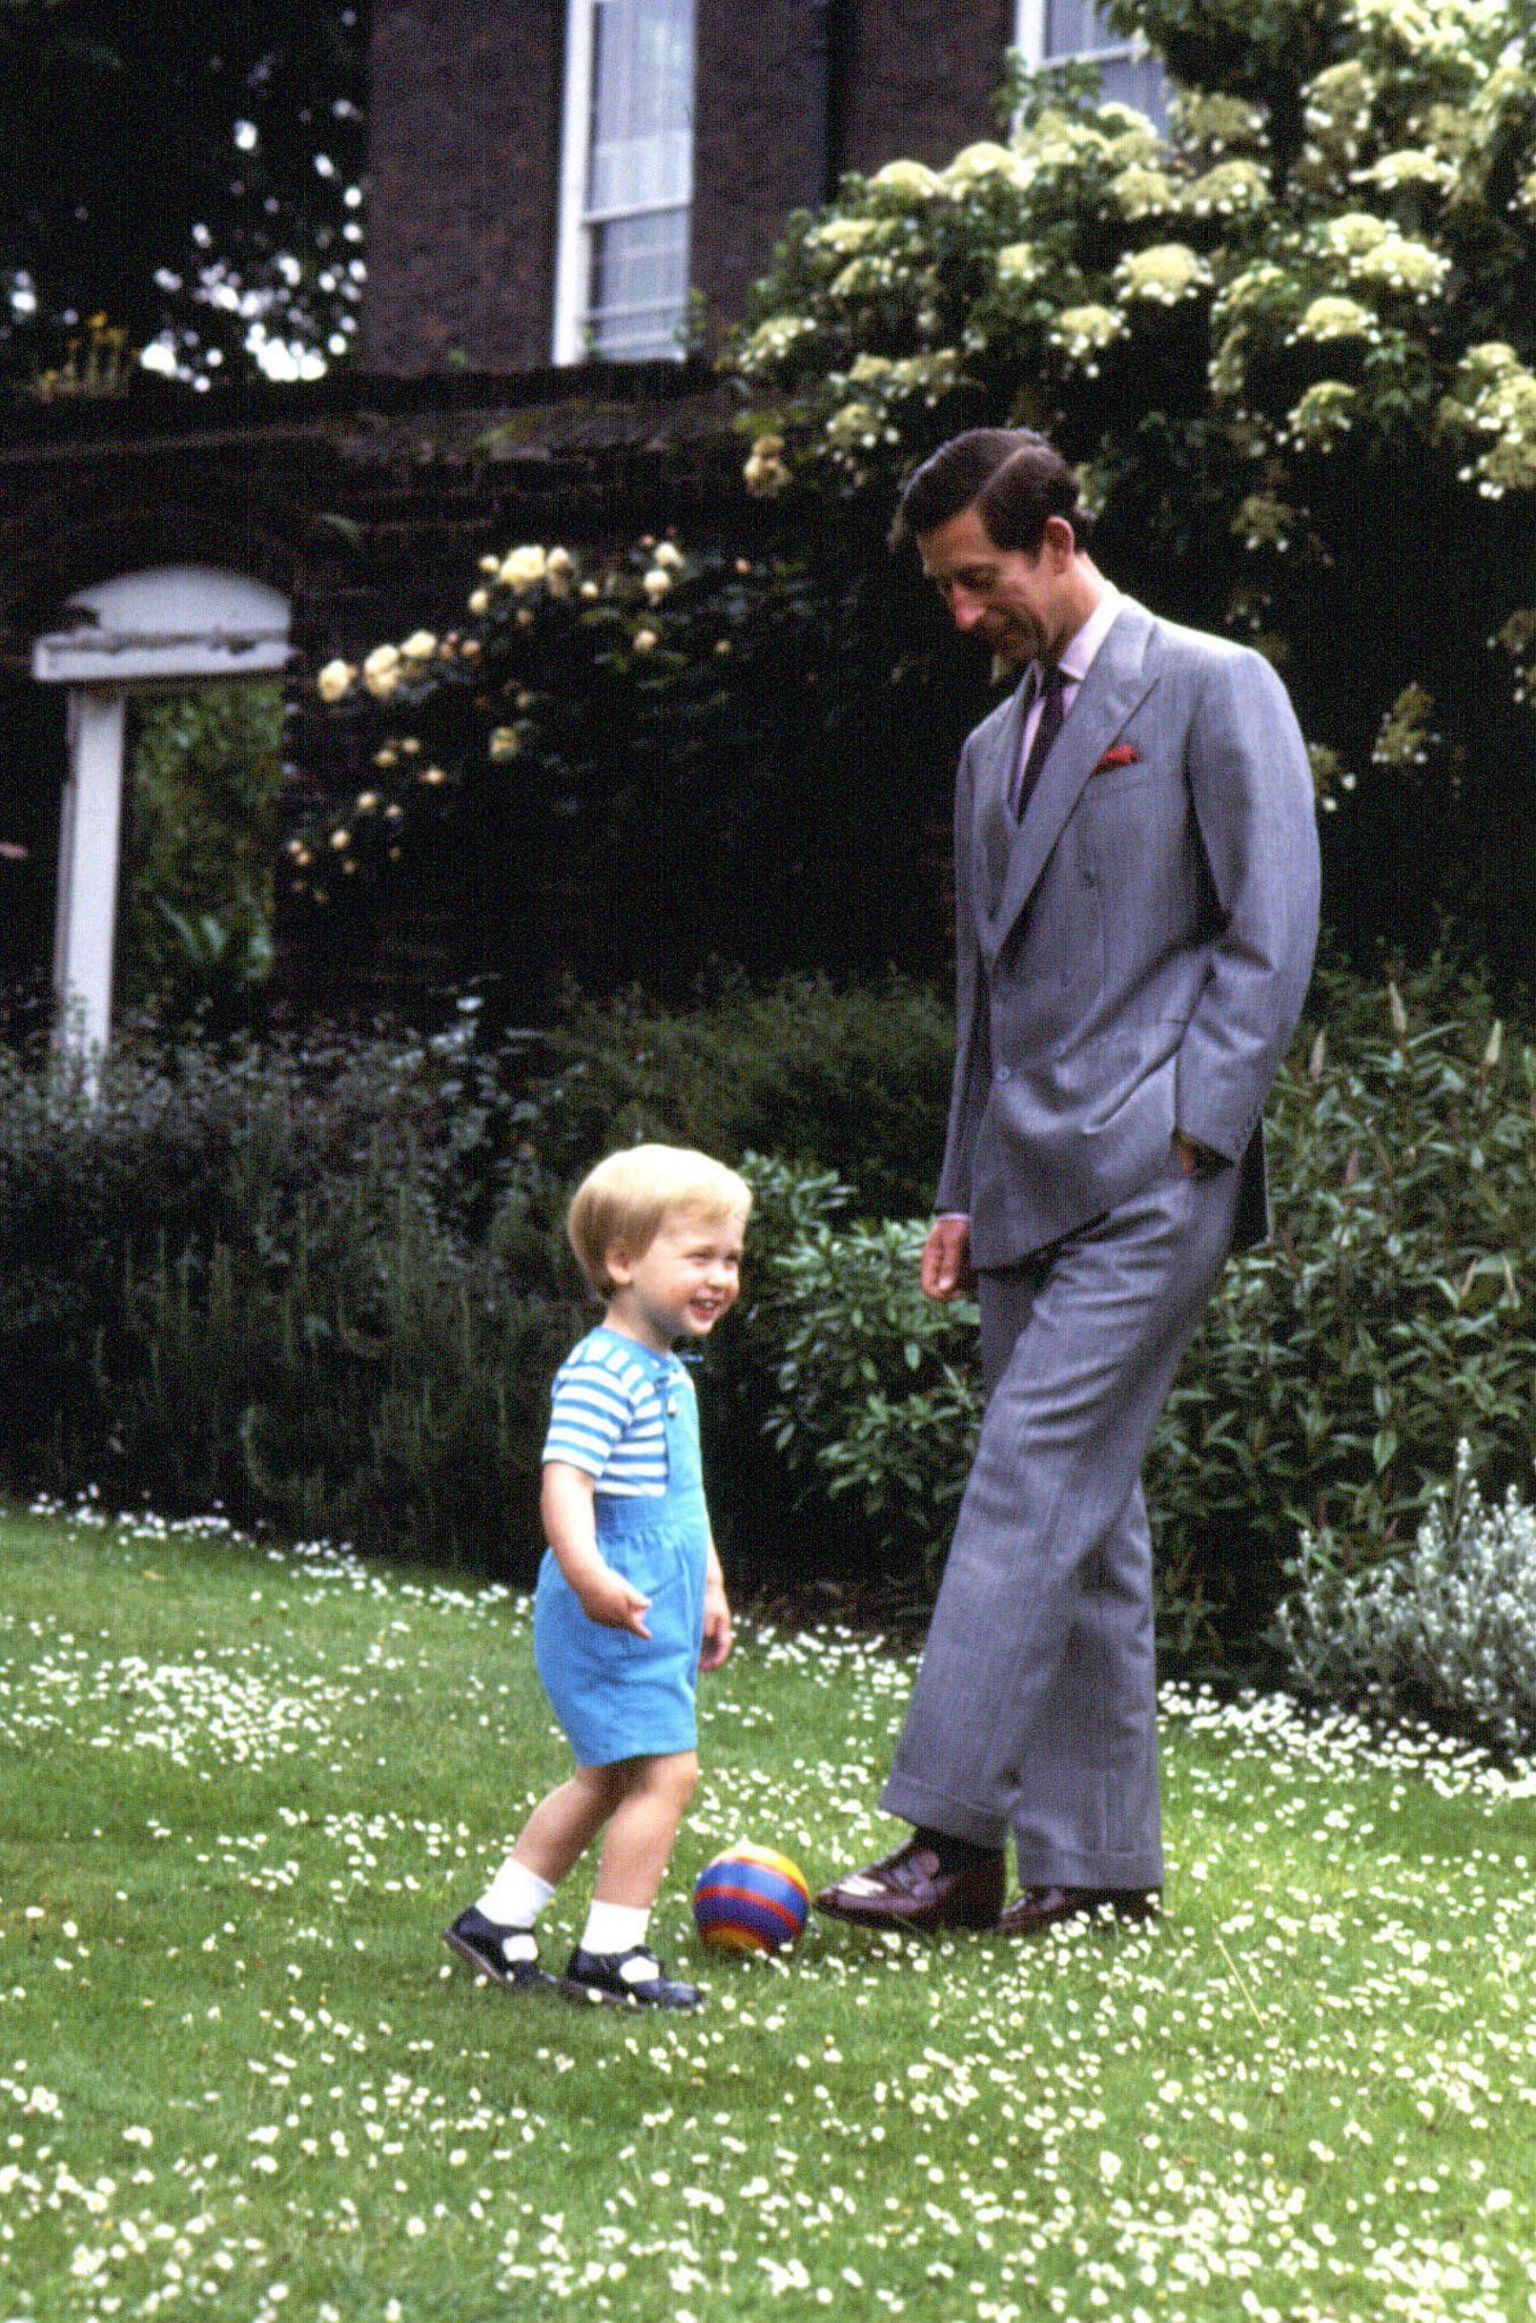 Young Prince William and young King Charles III kicking small football round in the garden